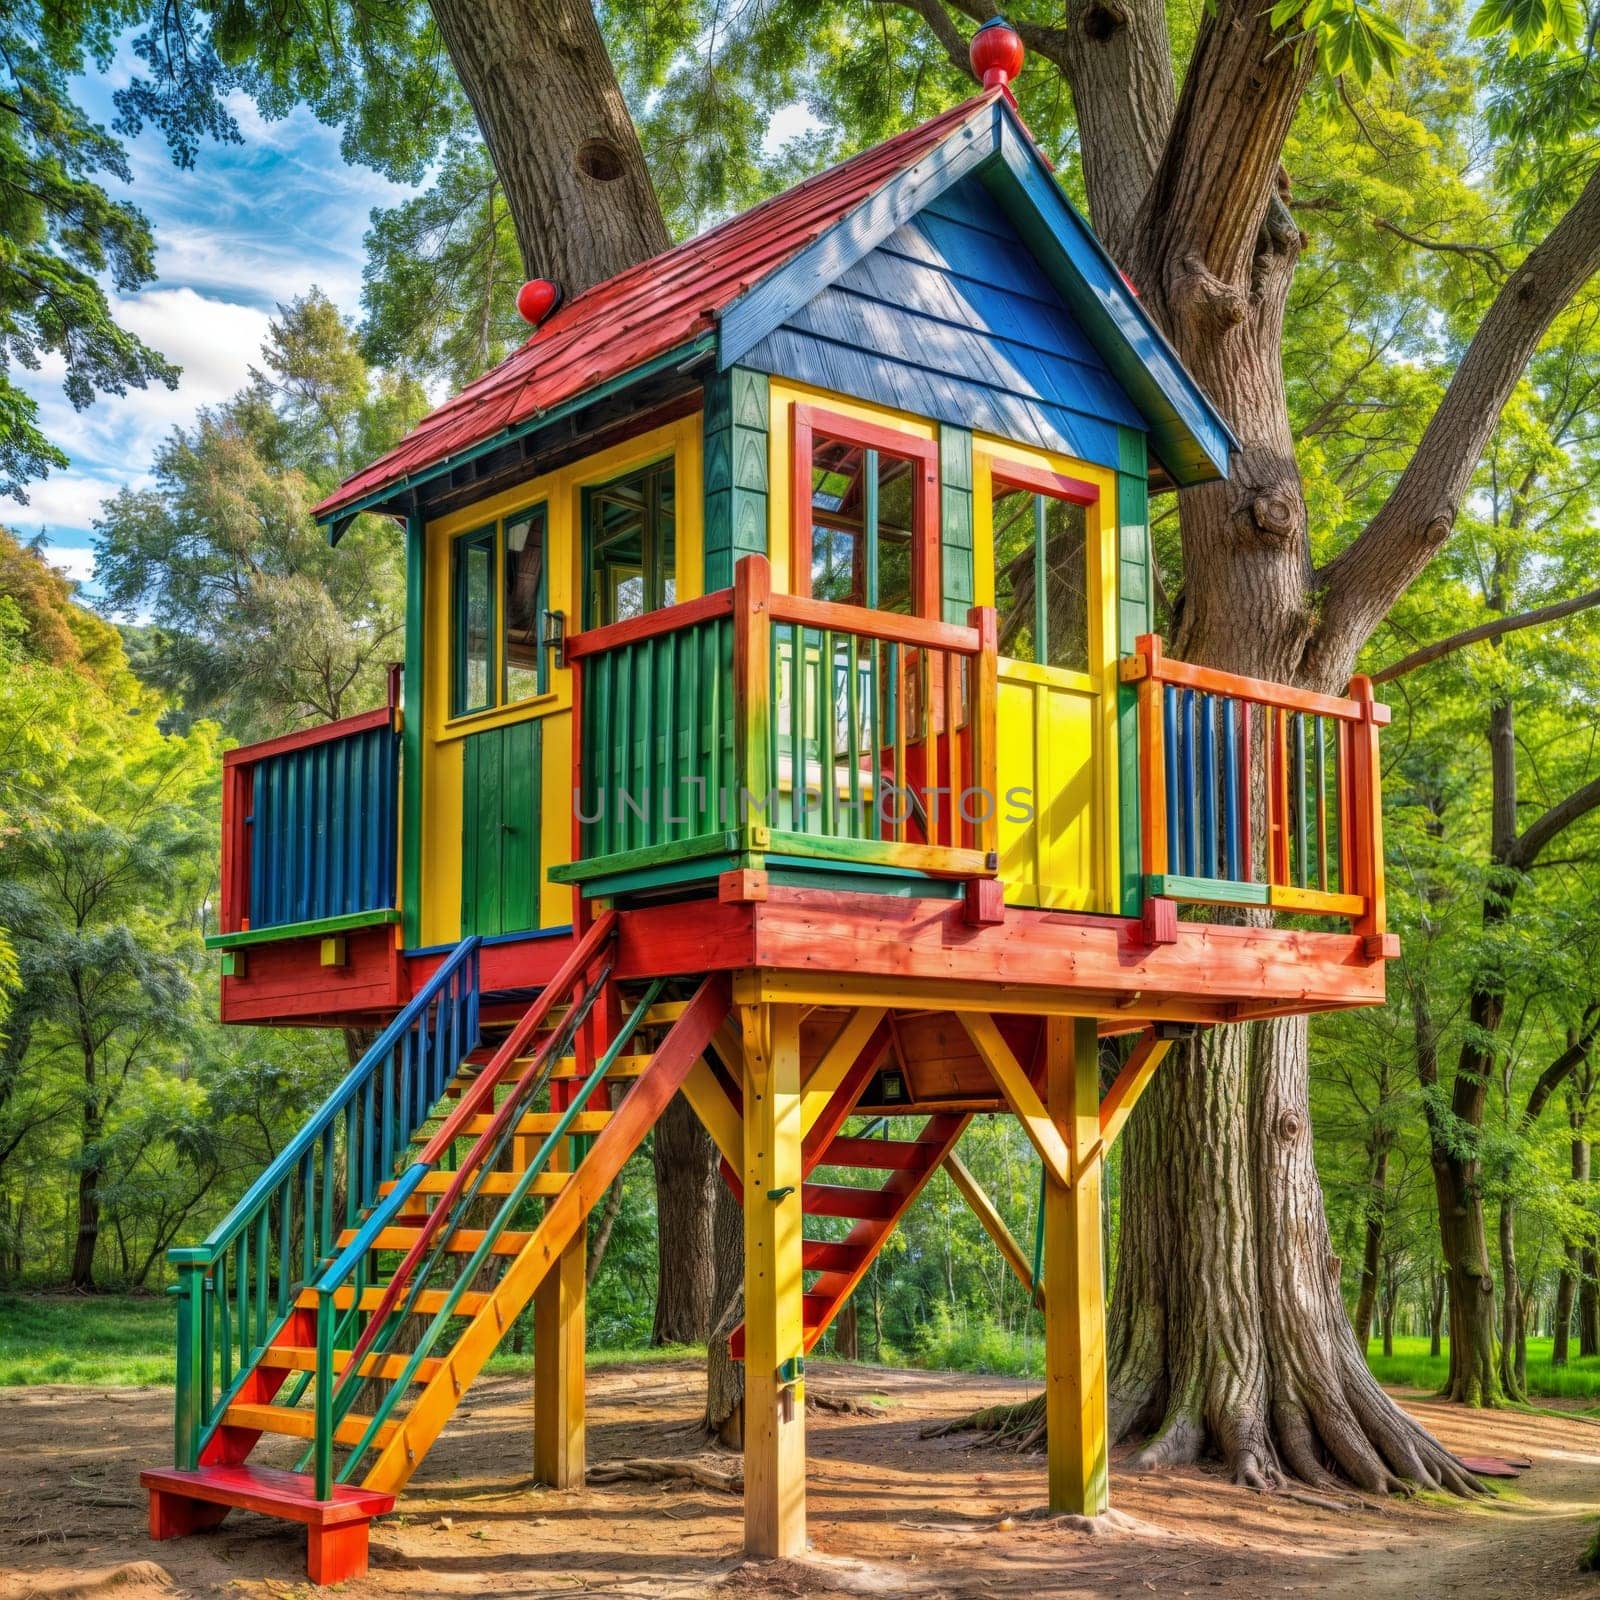 A vibrant tree house made of wood is perched atop a tall tree surrounded by lush green grass in a park, creating a playful and unique leisure space for children. AI generation